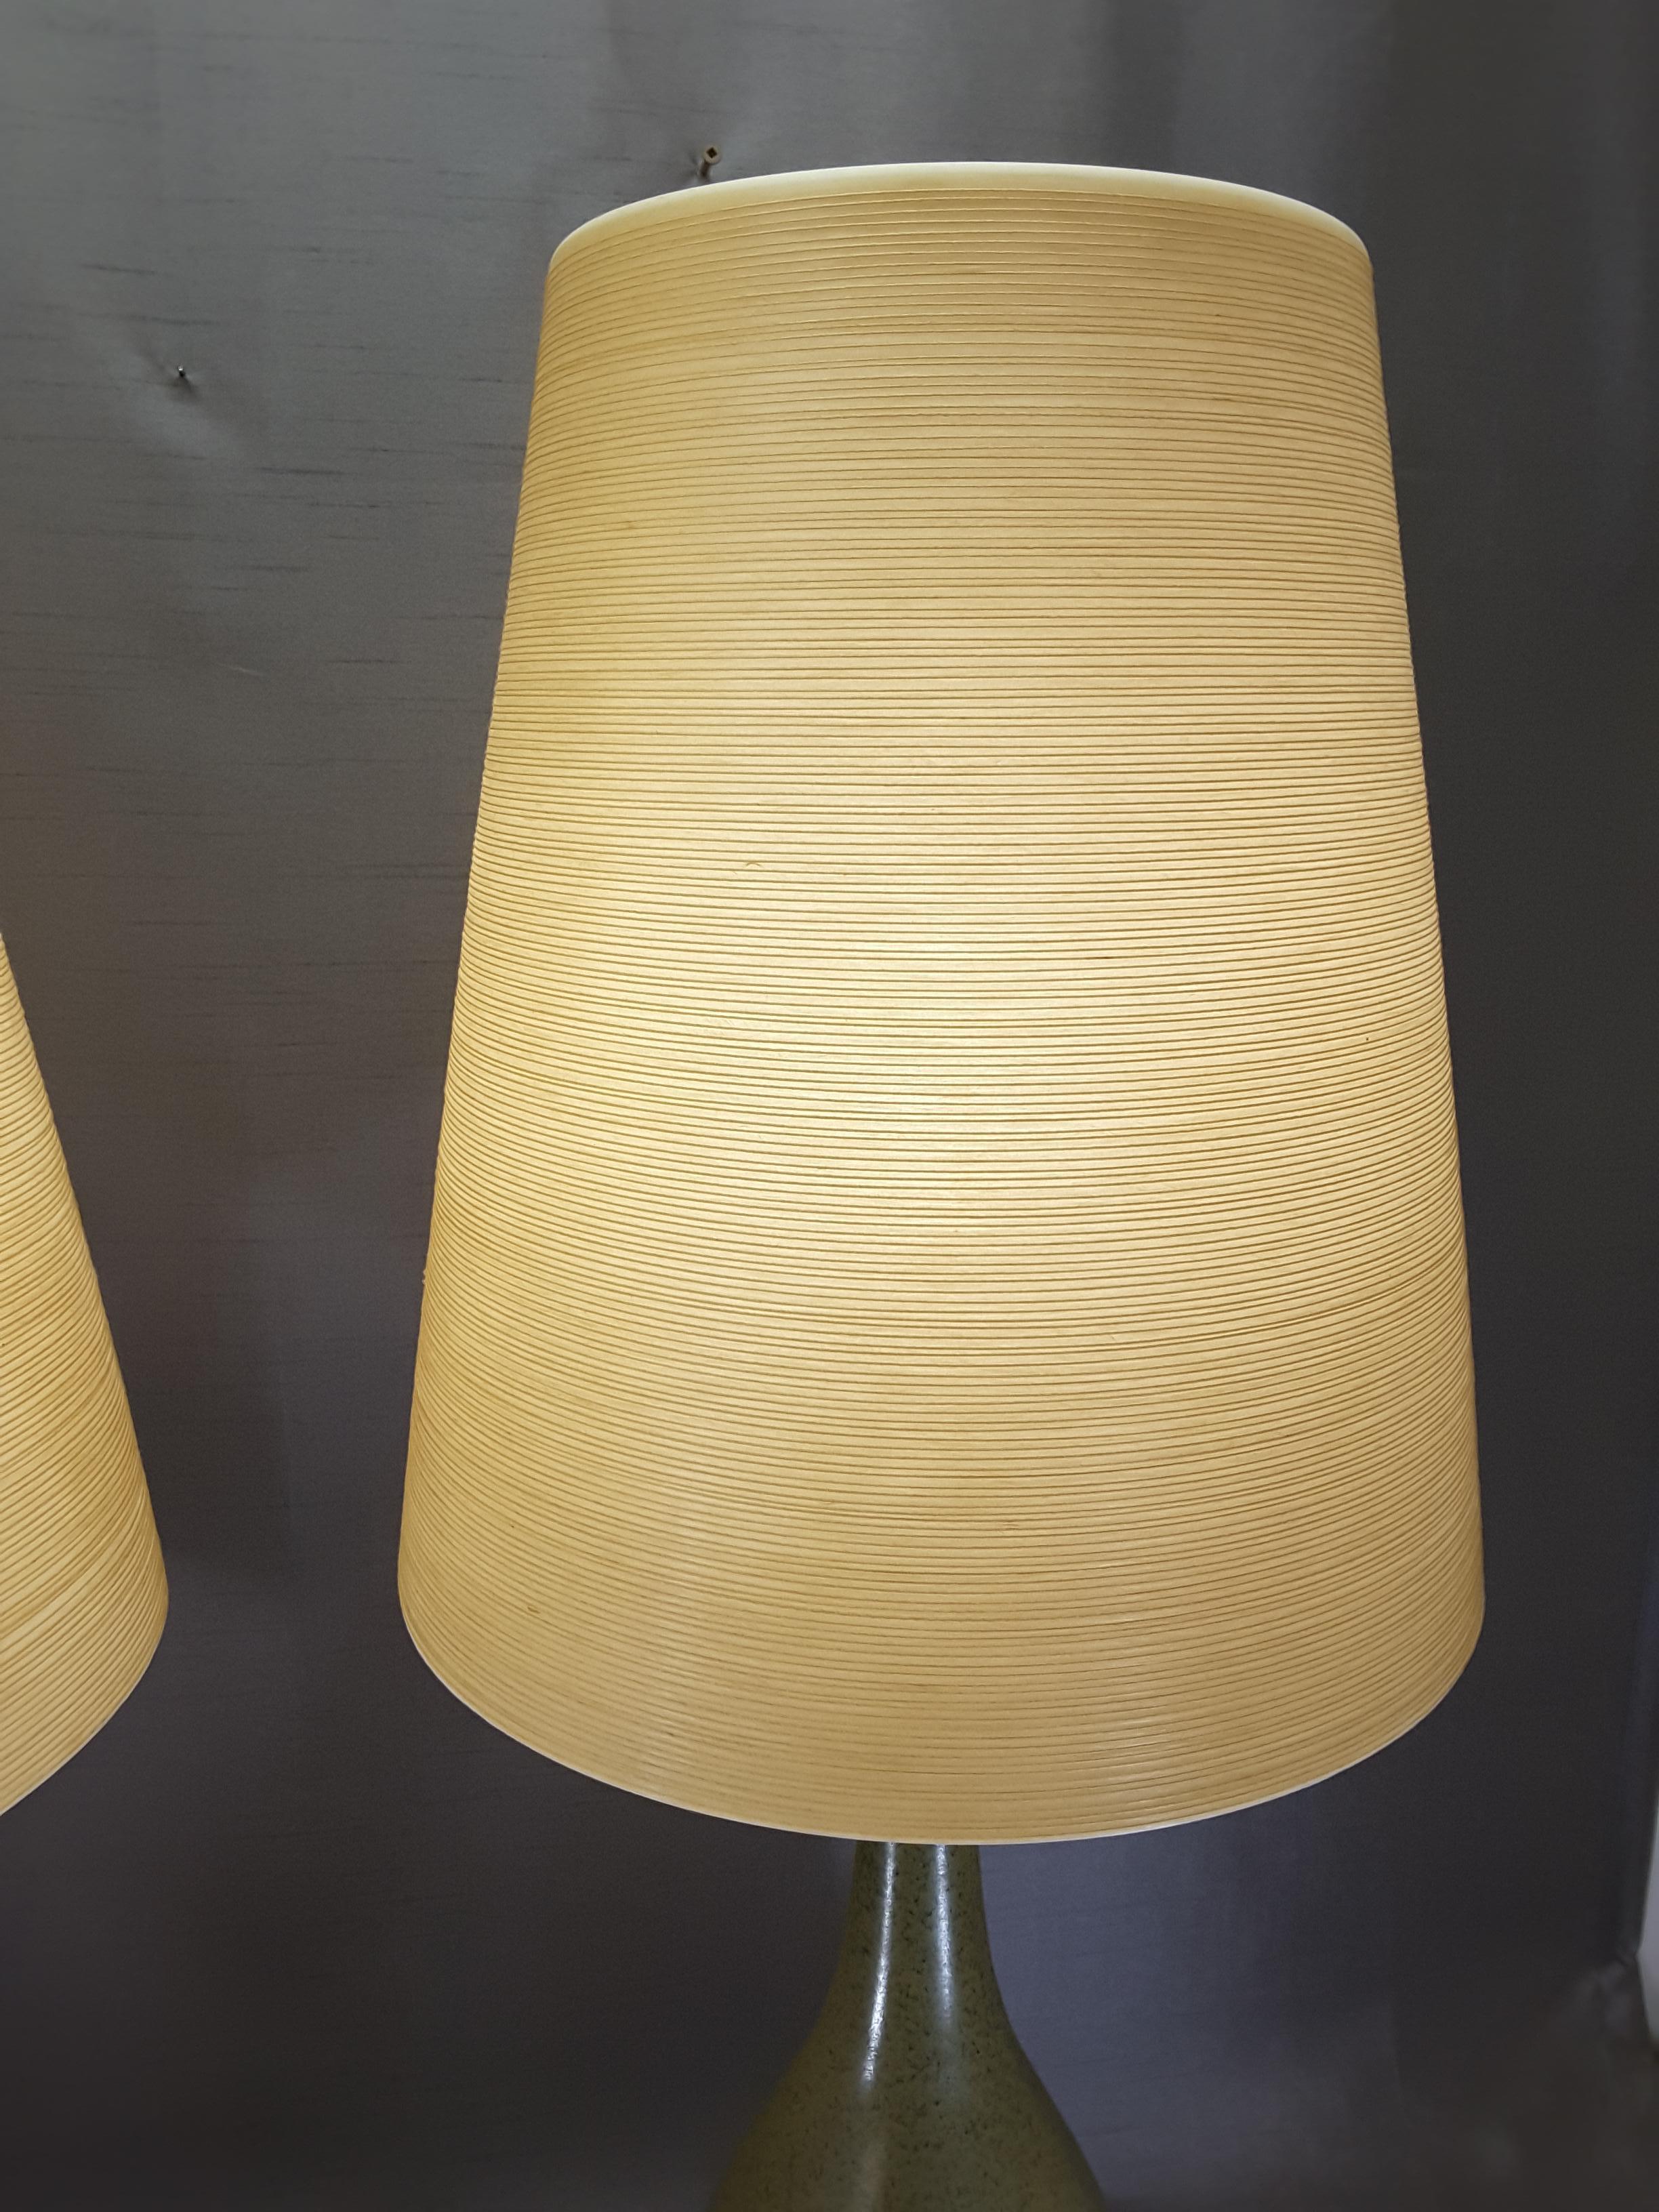 Hand-Crafted Large Scale Pair of Lotte & Gunnar Bostlund Forest Green Table Lamps, circa 1960